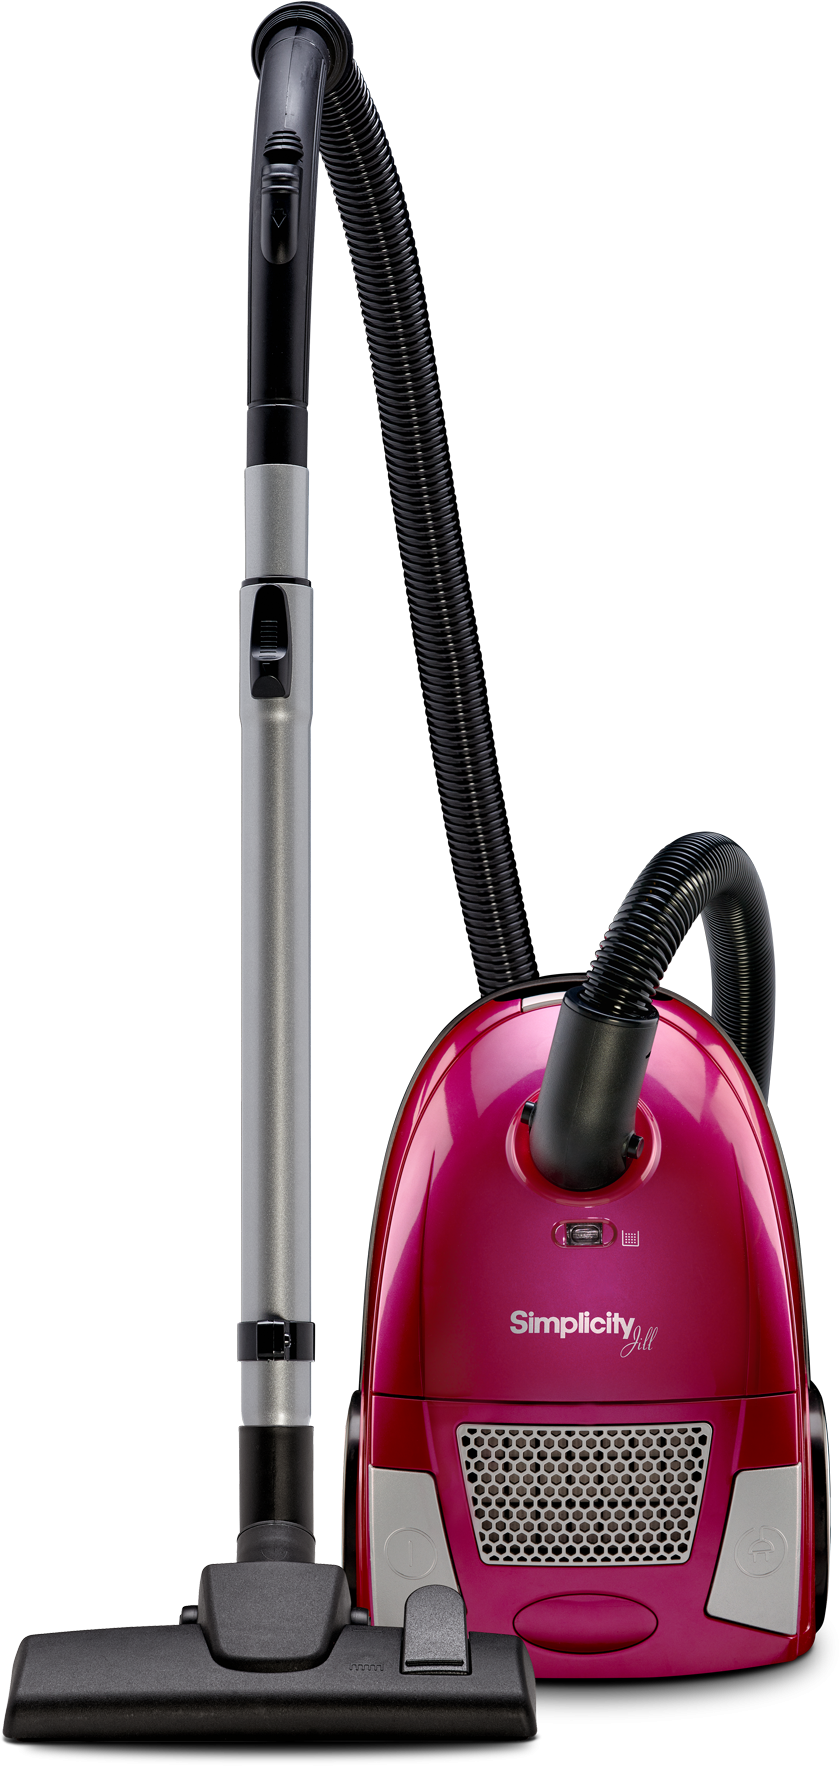 Jill Compact Canister Vacuum Cleaner Rh Simplicityvac - Simplicity Vacuums (1800x1800)